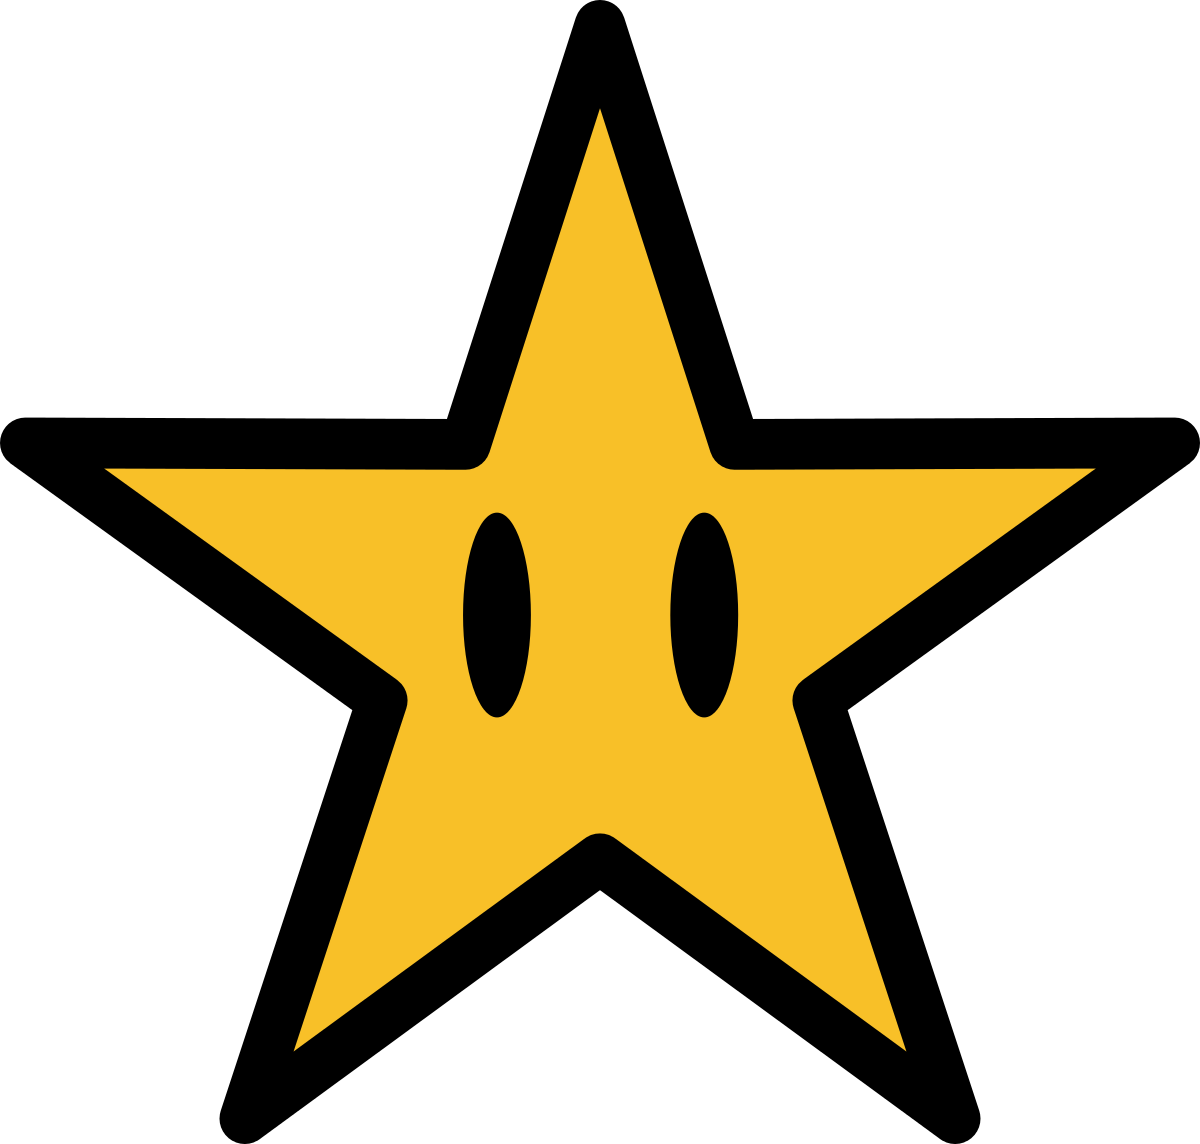 A Yellow Star With Black Background